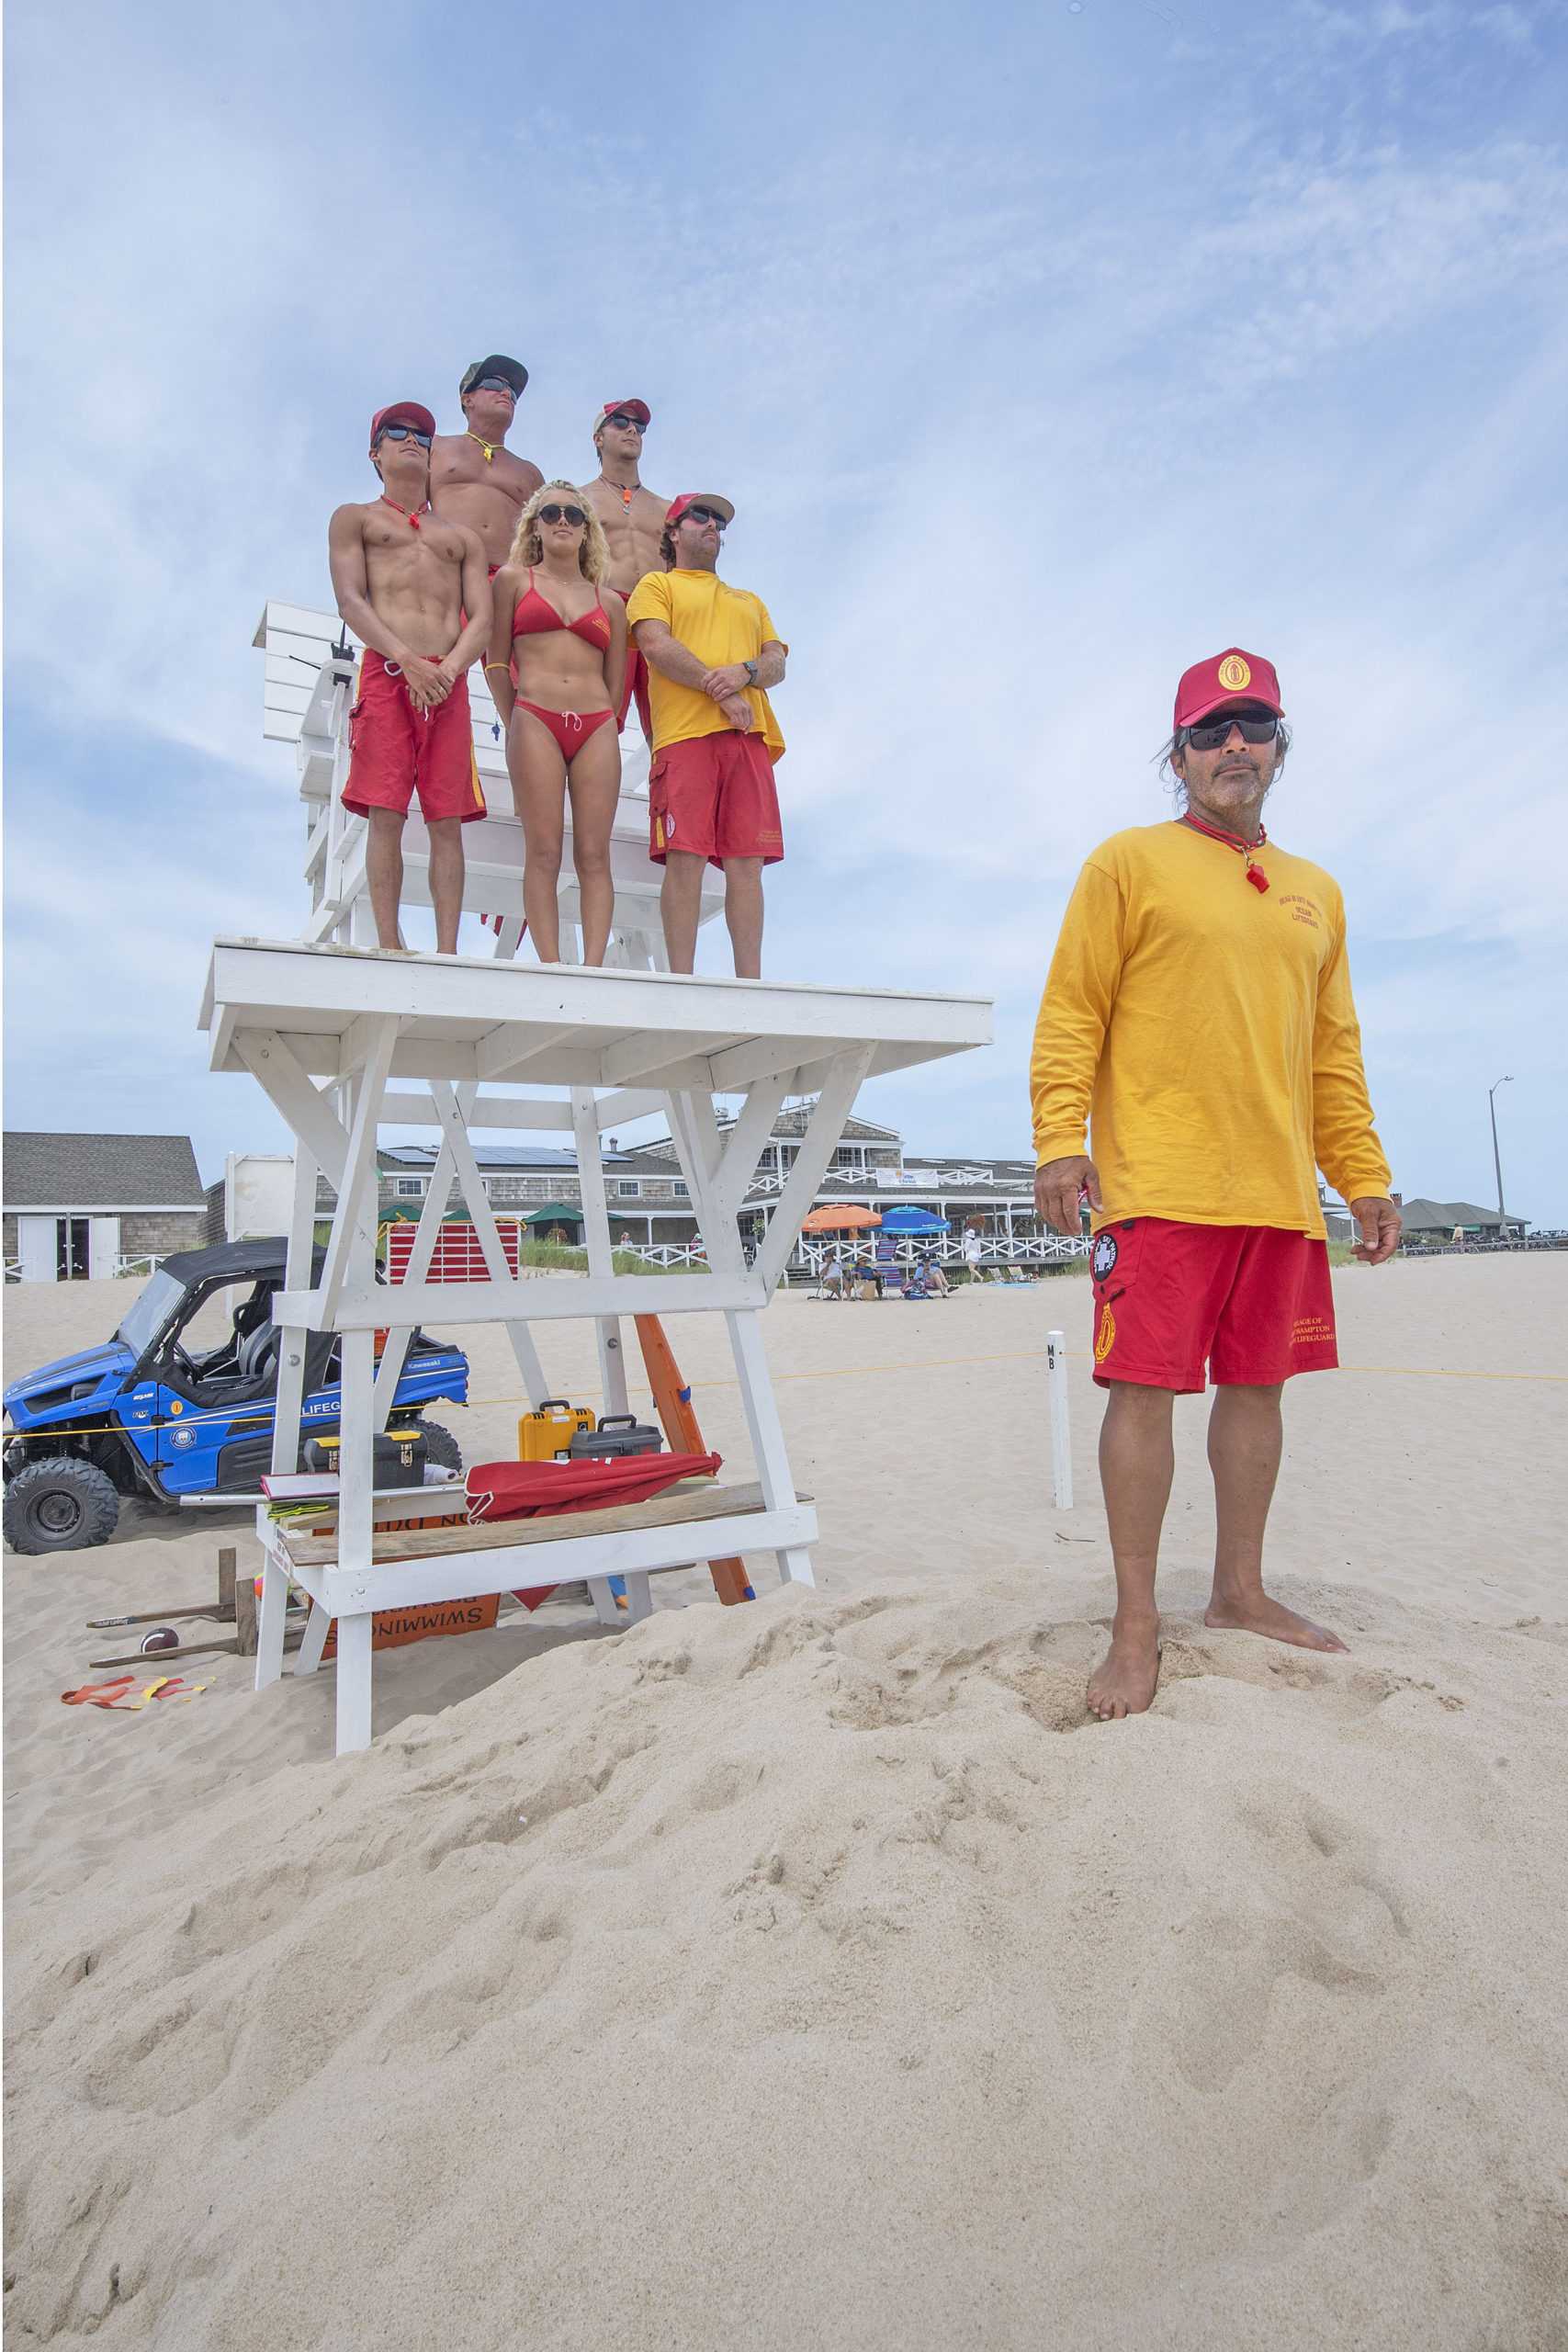 East Hampton Village Ocean Rescue's chief lifeguard, Jimmy Minardi, and his crew at the new 